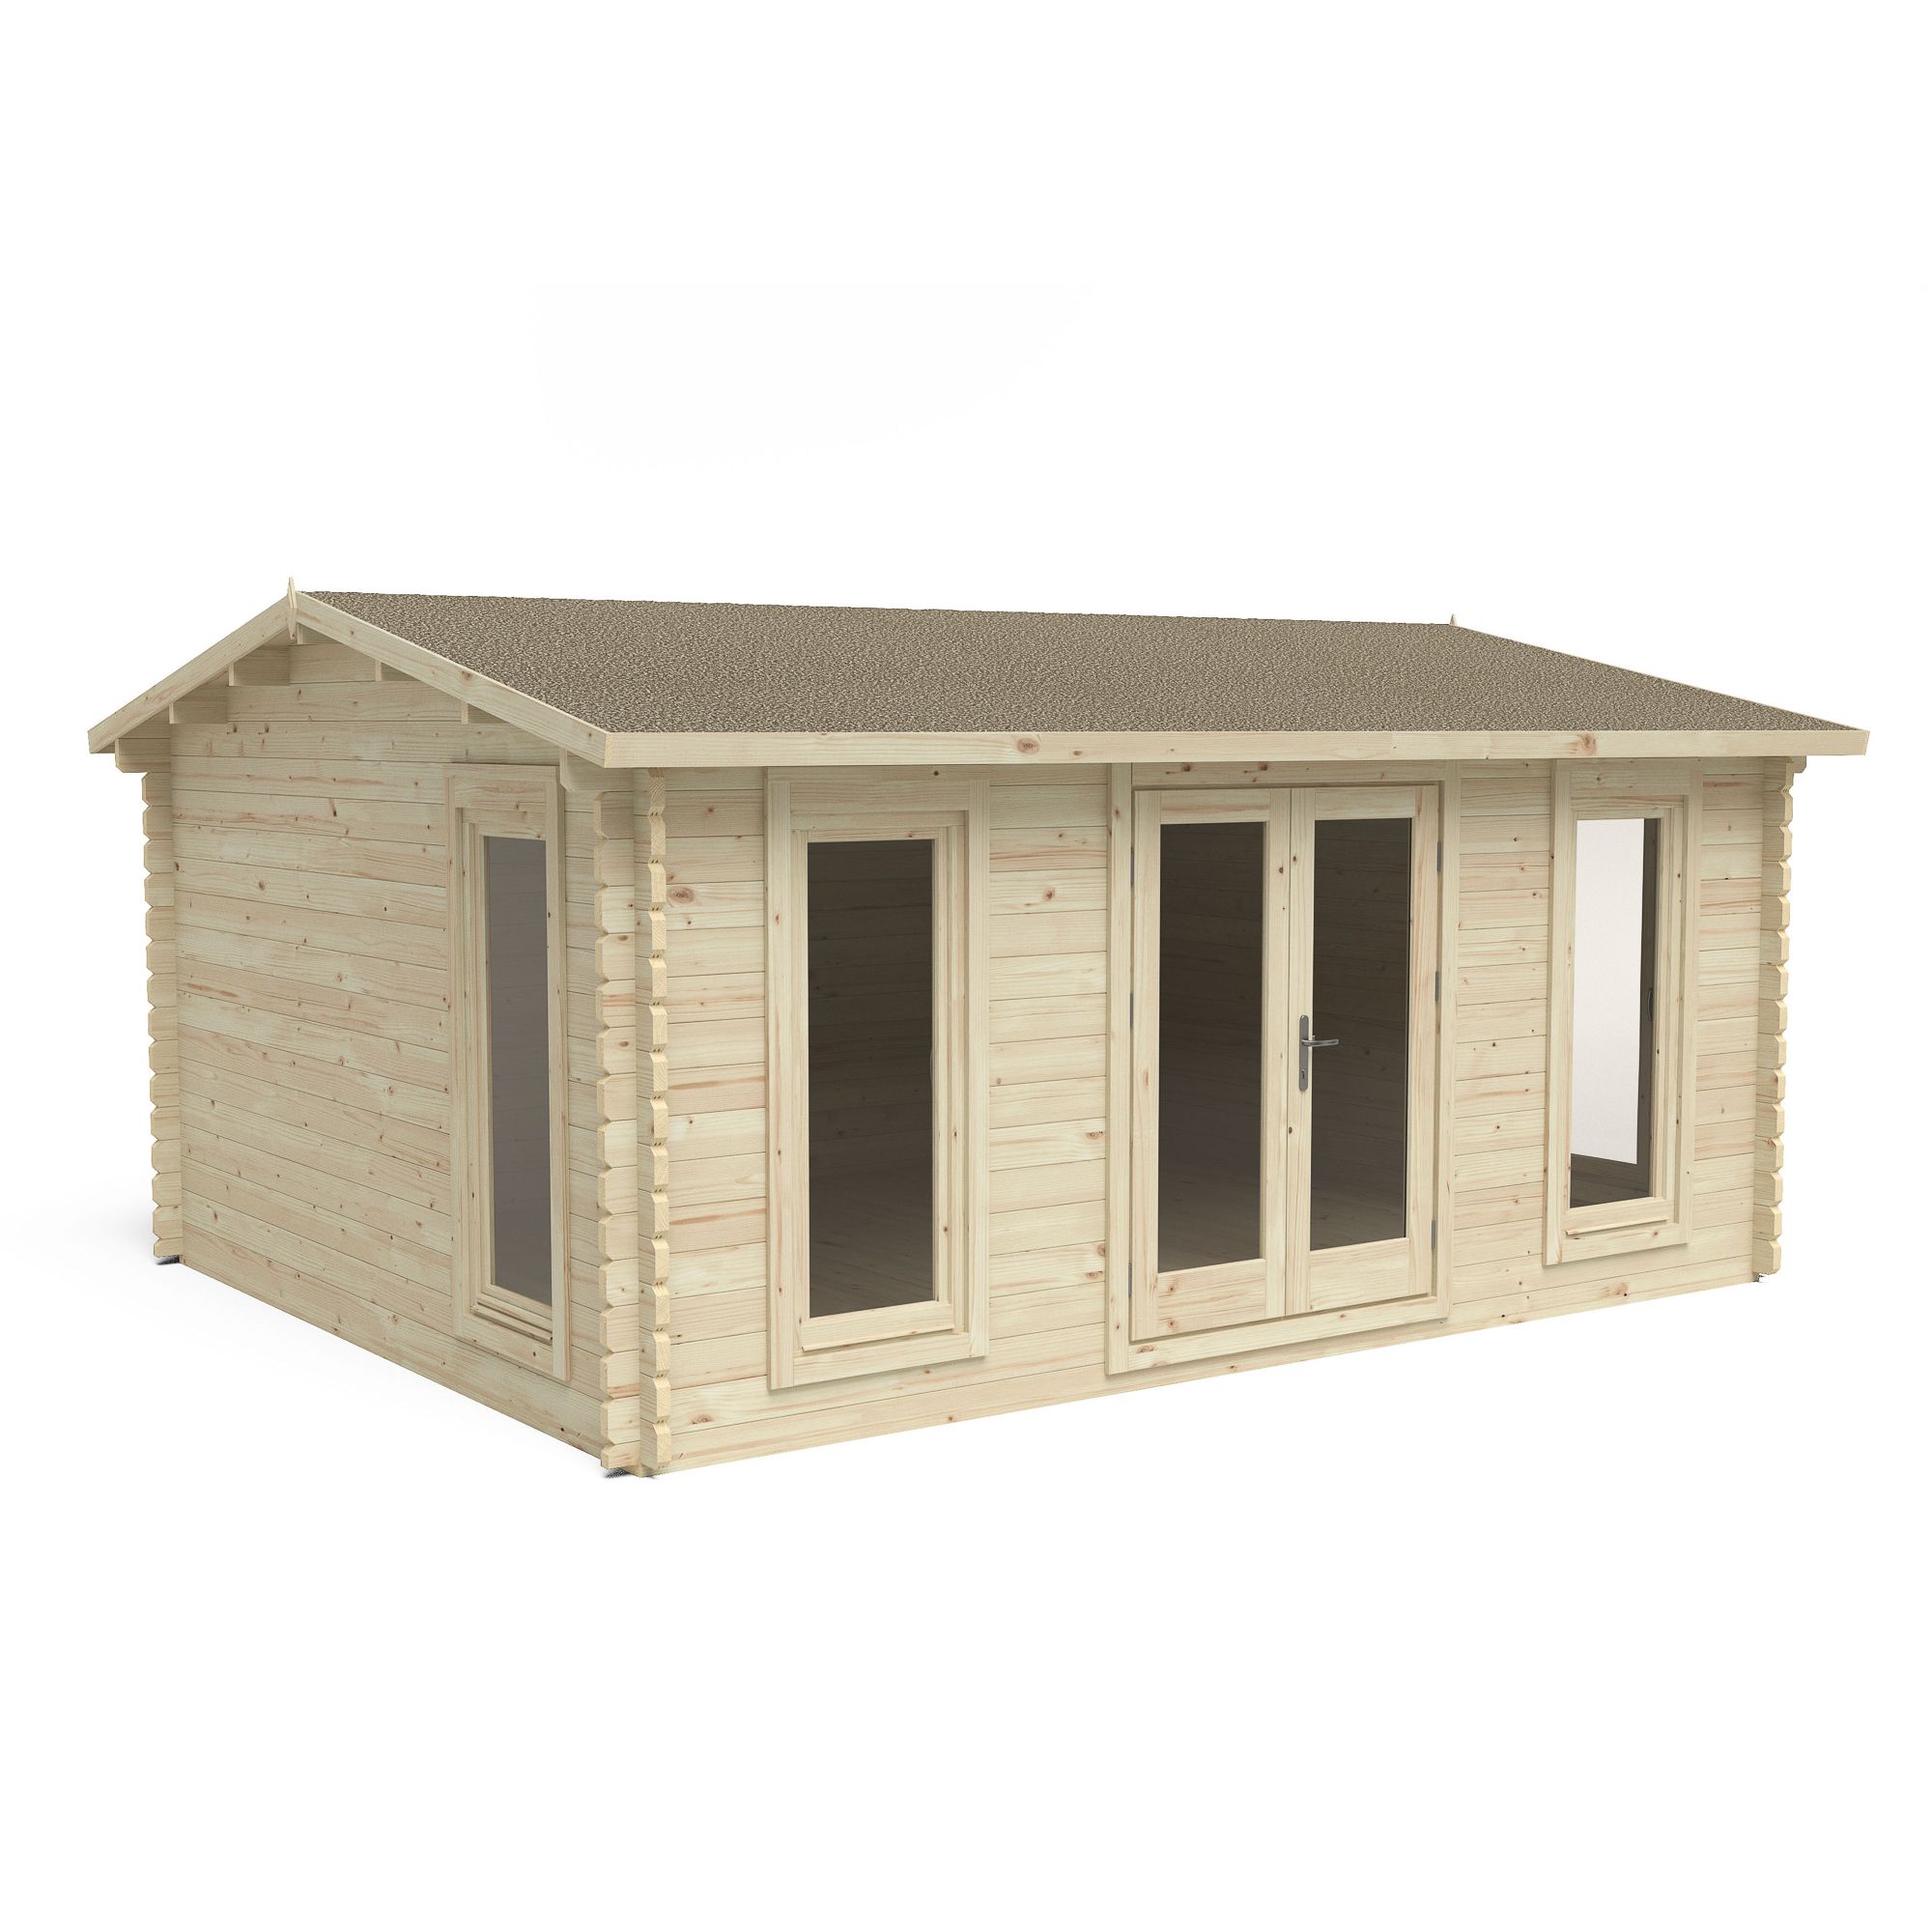 Forest Garden Rushock 5x4 ft Toughened glass with Double door Apex Solid wood Cabin